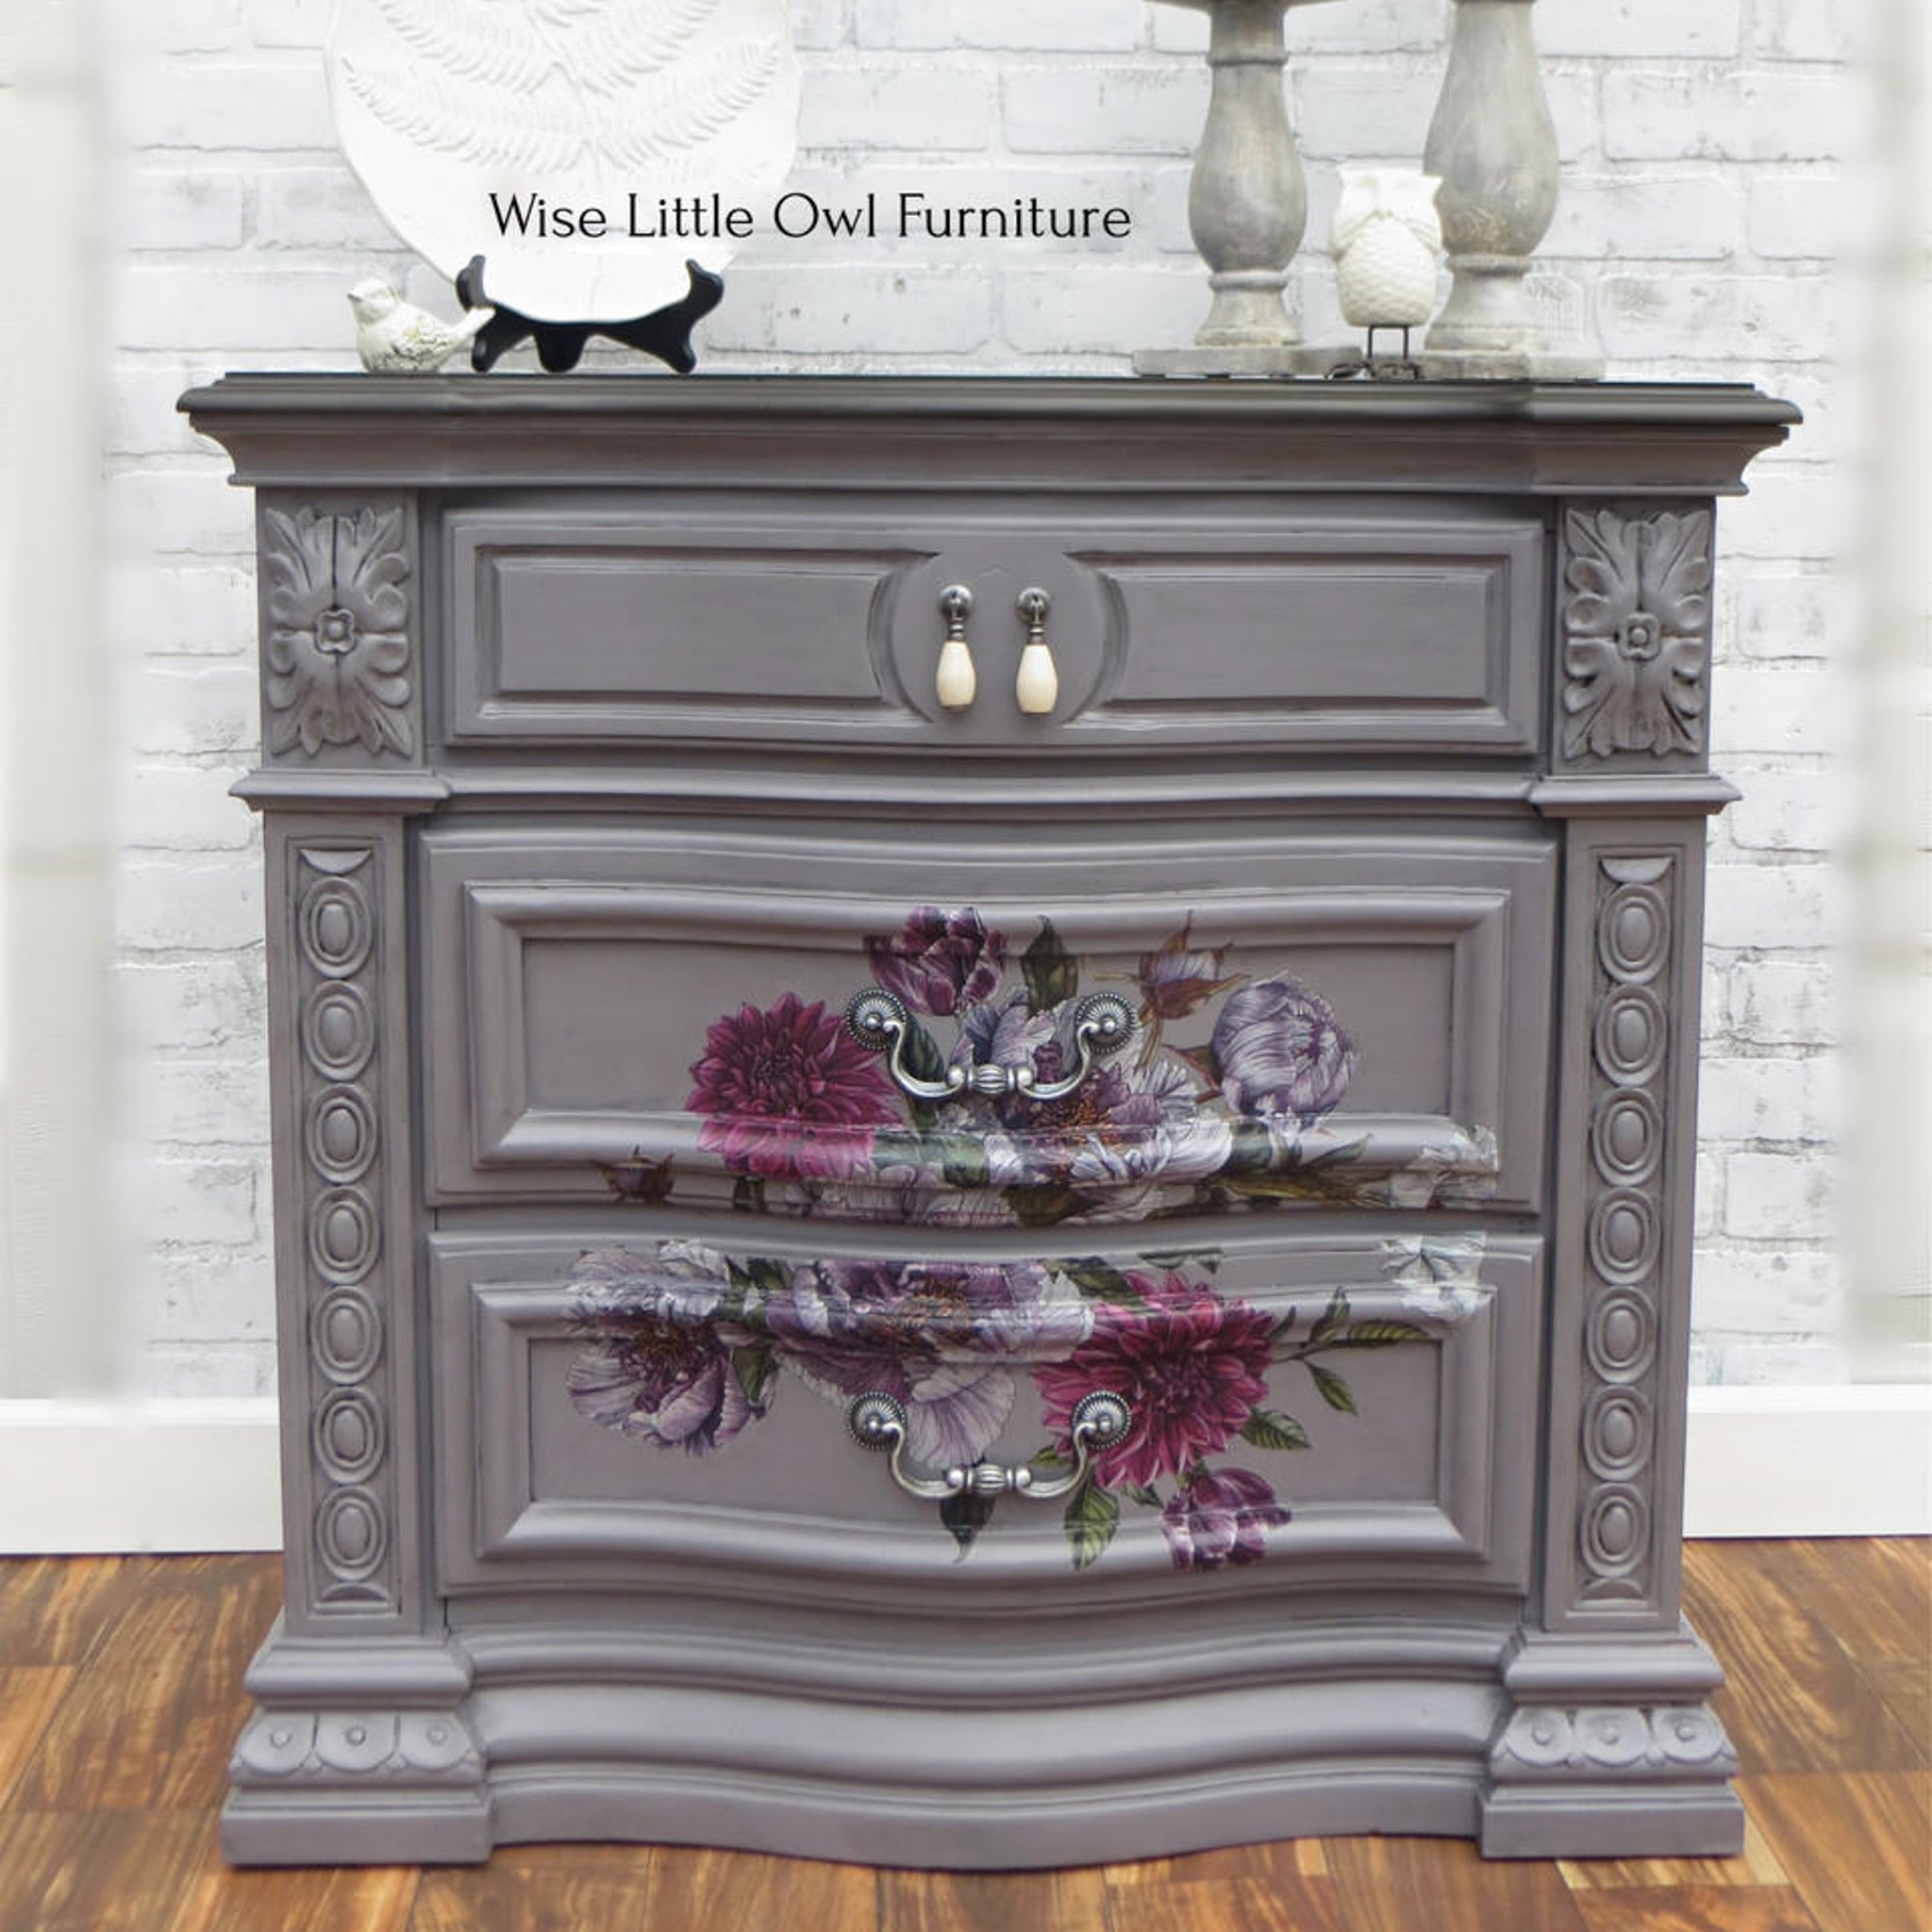 A vintage 3-drawer nightstand refurbished by Wise Little Owl Furniture is painted light gray and features Buds and Branches on its lower 2 drawers.